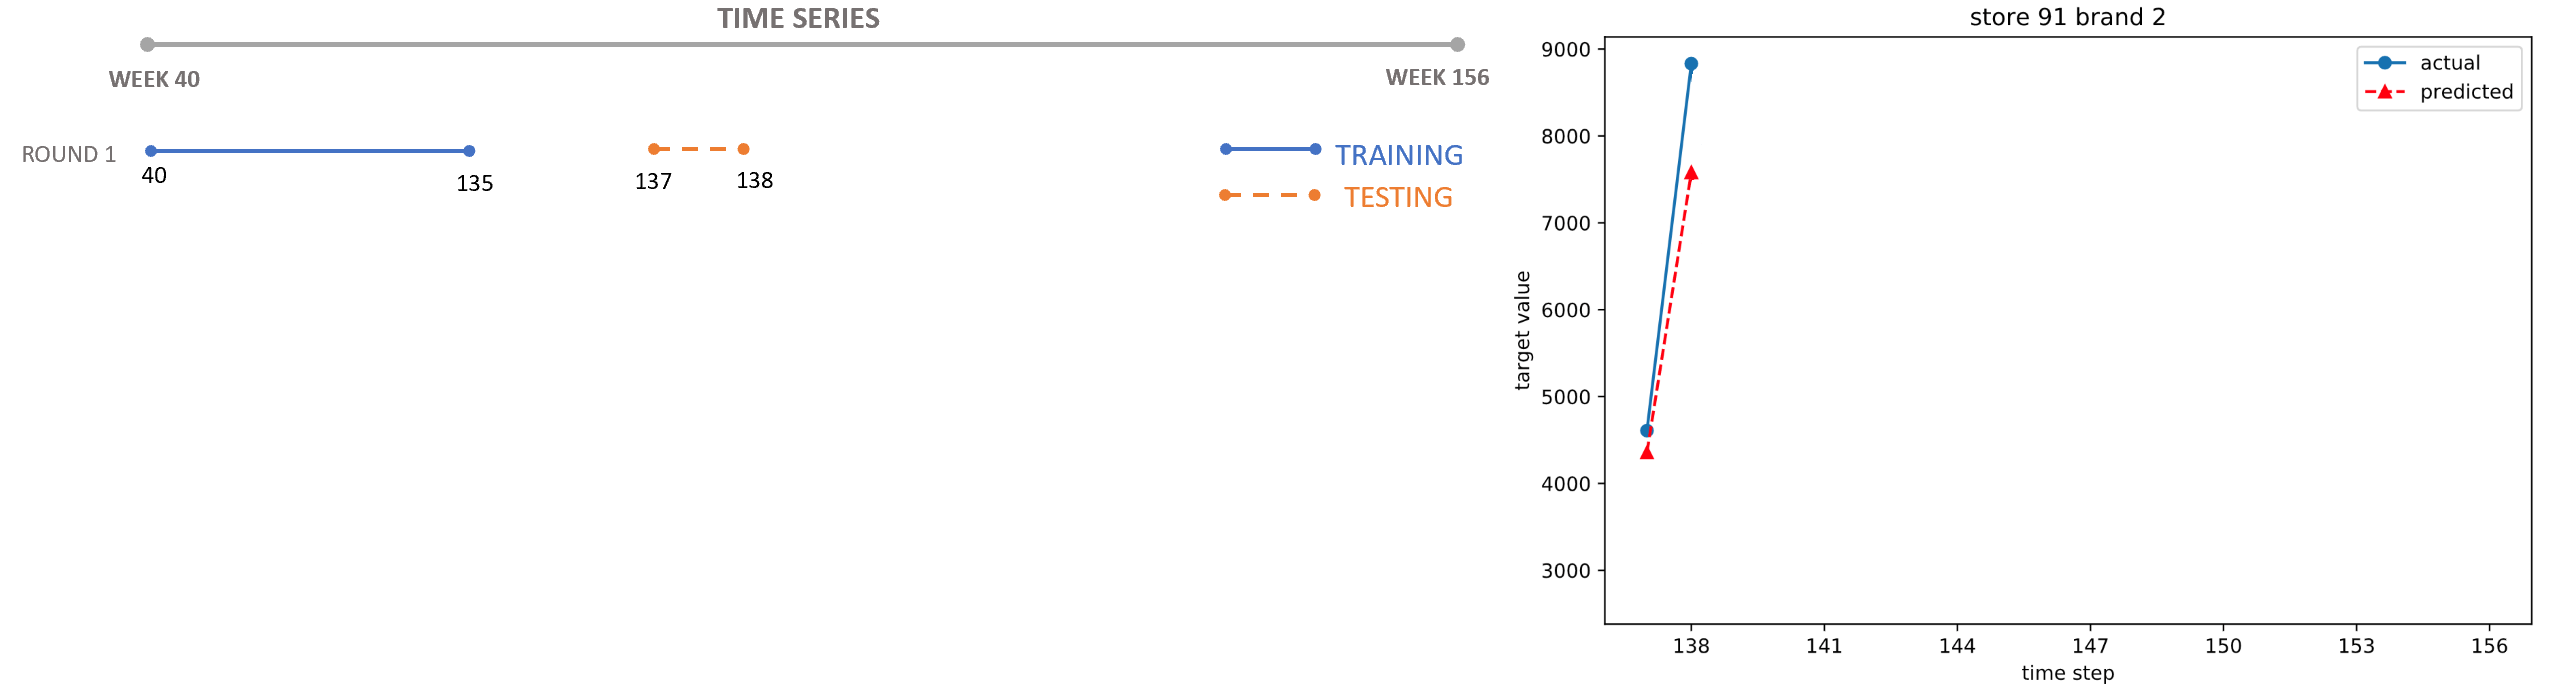 Figure 1: Visualization of training and testing iterations of a sales forecasting scenario using LightGBM model